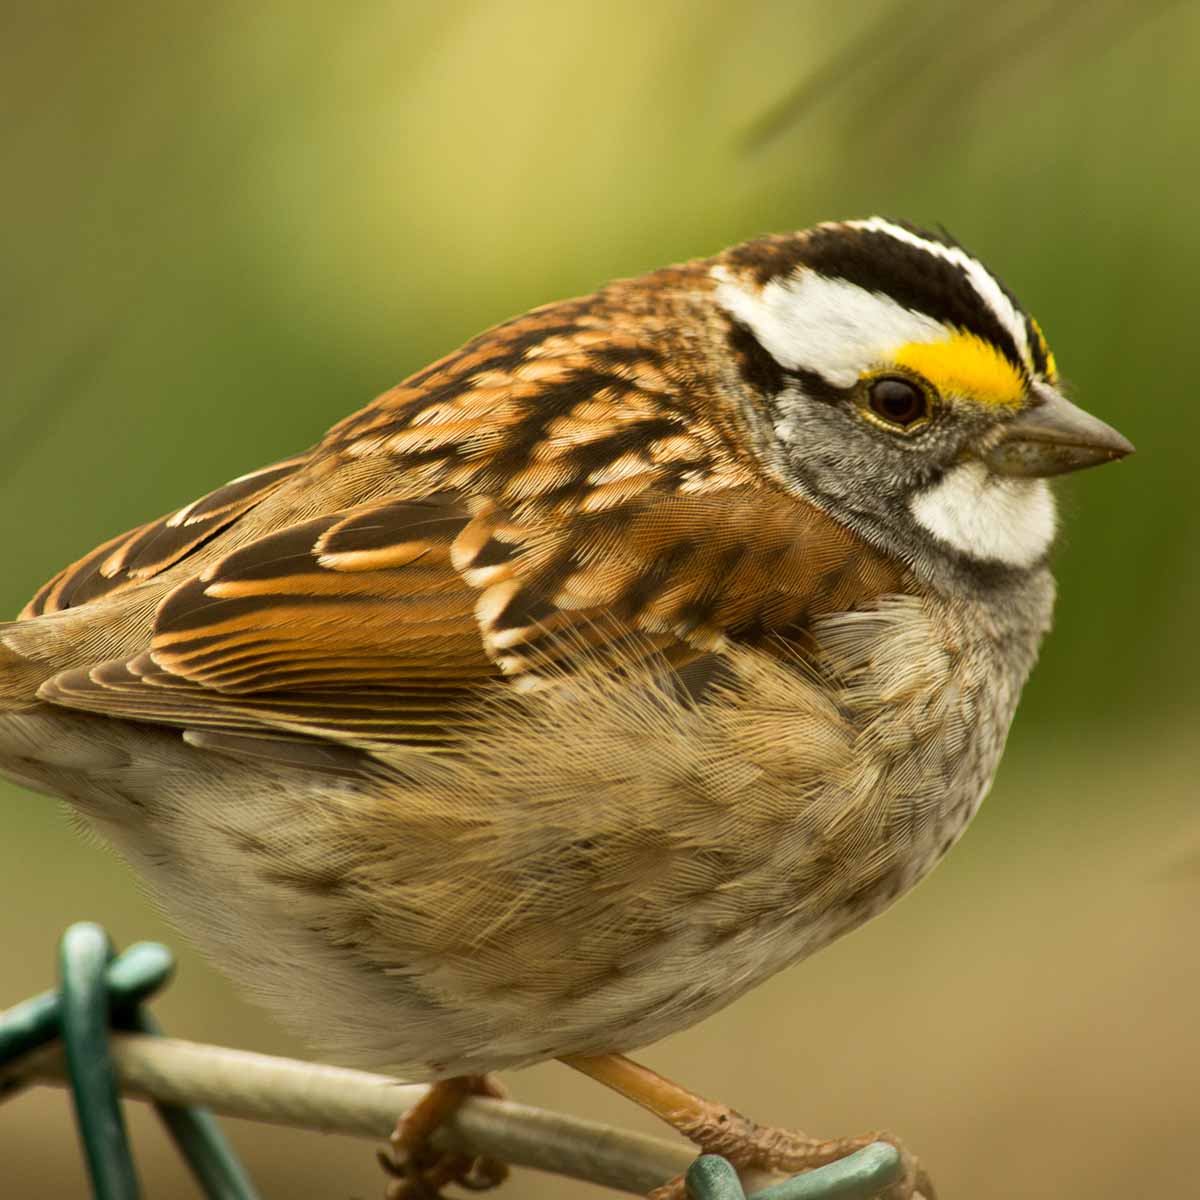 The image shows a white-throated sparrow perched on a branch. The sparrow has a distinctive, peanut-sized white throat and white-striped head, contrasting with its blended brown back and wings. Its beak is small and conical, adapted for eating seeds and insects. The sparrow's body is compact and its tail is short, giving it a rounded, cute, mini appearance. The bird is surrounded by lush, green foliage of a natural, woodland setting. White-throated sparrows are a common sight in North America, known for their melodic, whistling song and their tendency to forage on the ground in small flocks.